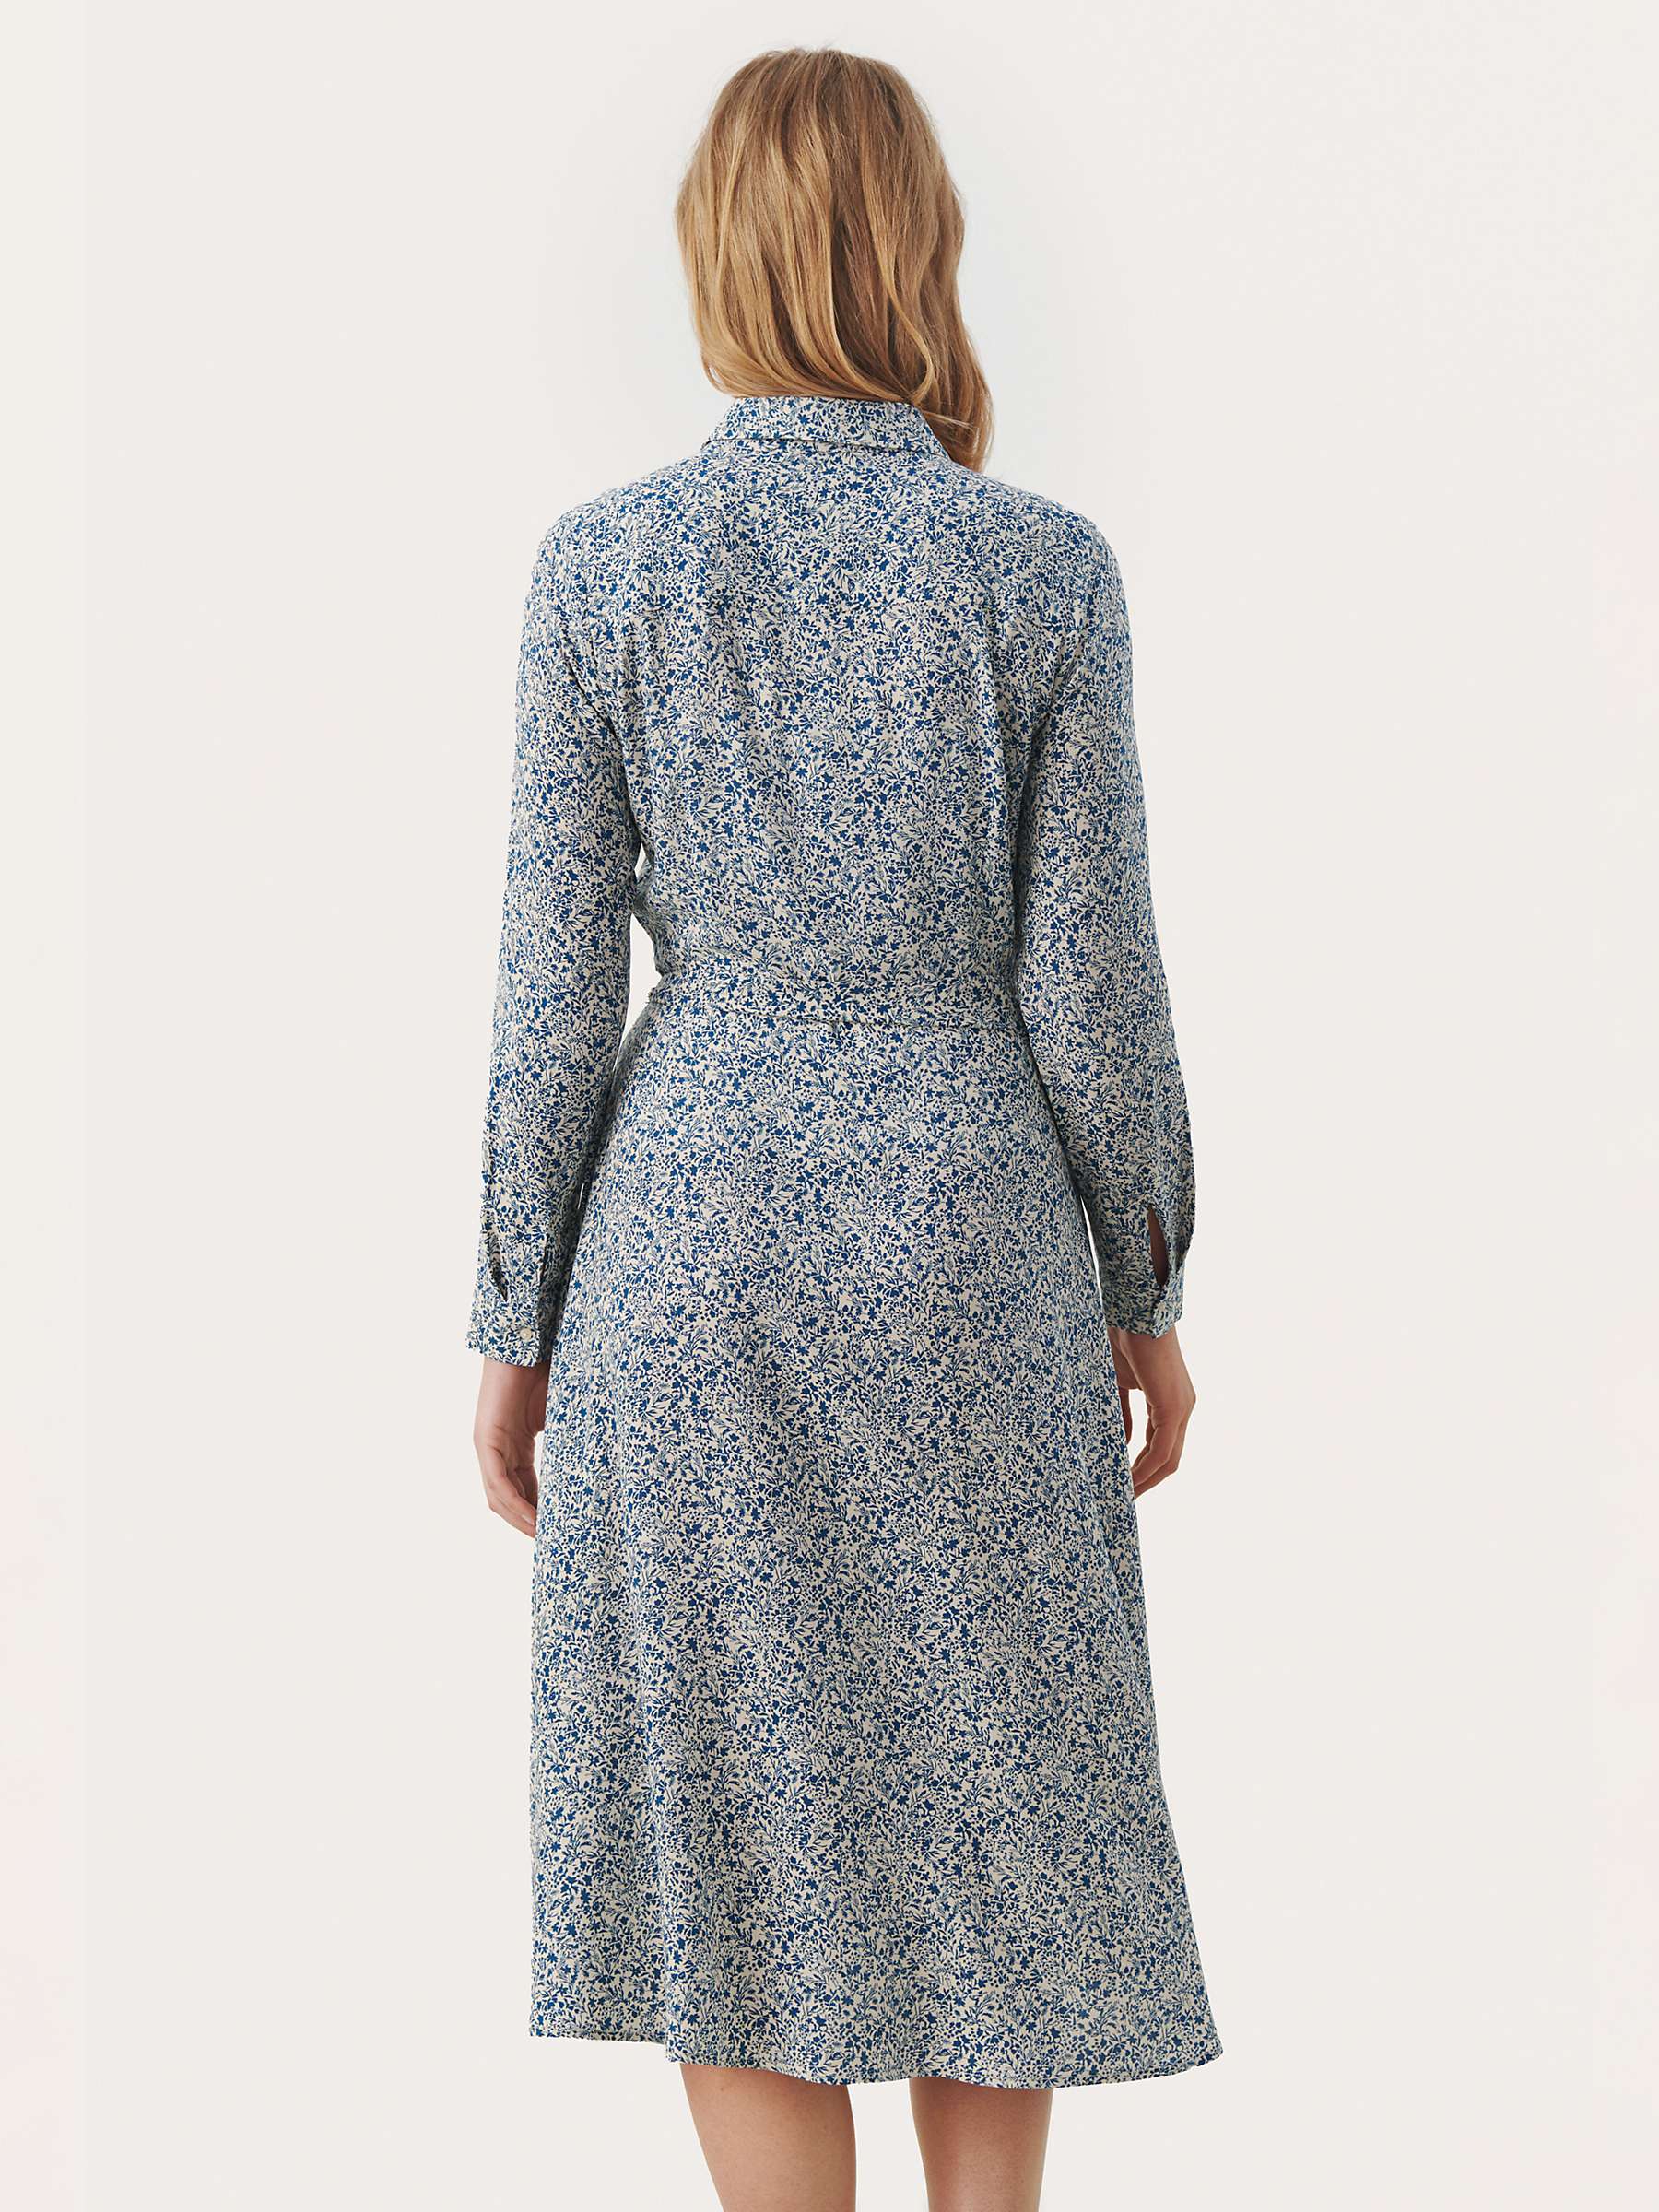 Buy Part Two Shelby Ecovero Shirt Dress, Blue/Multi Online at johnlewis.com